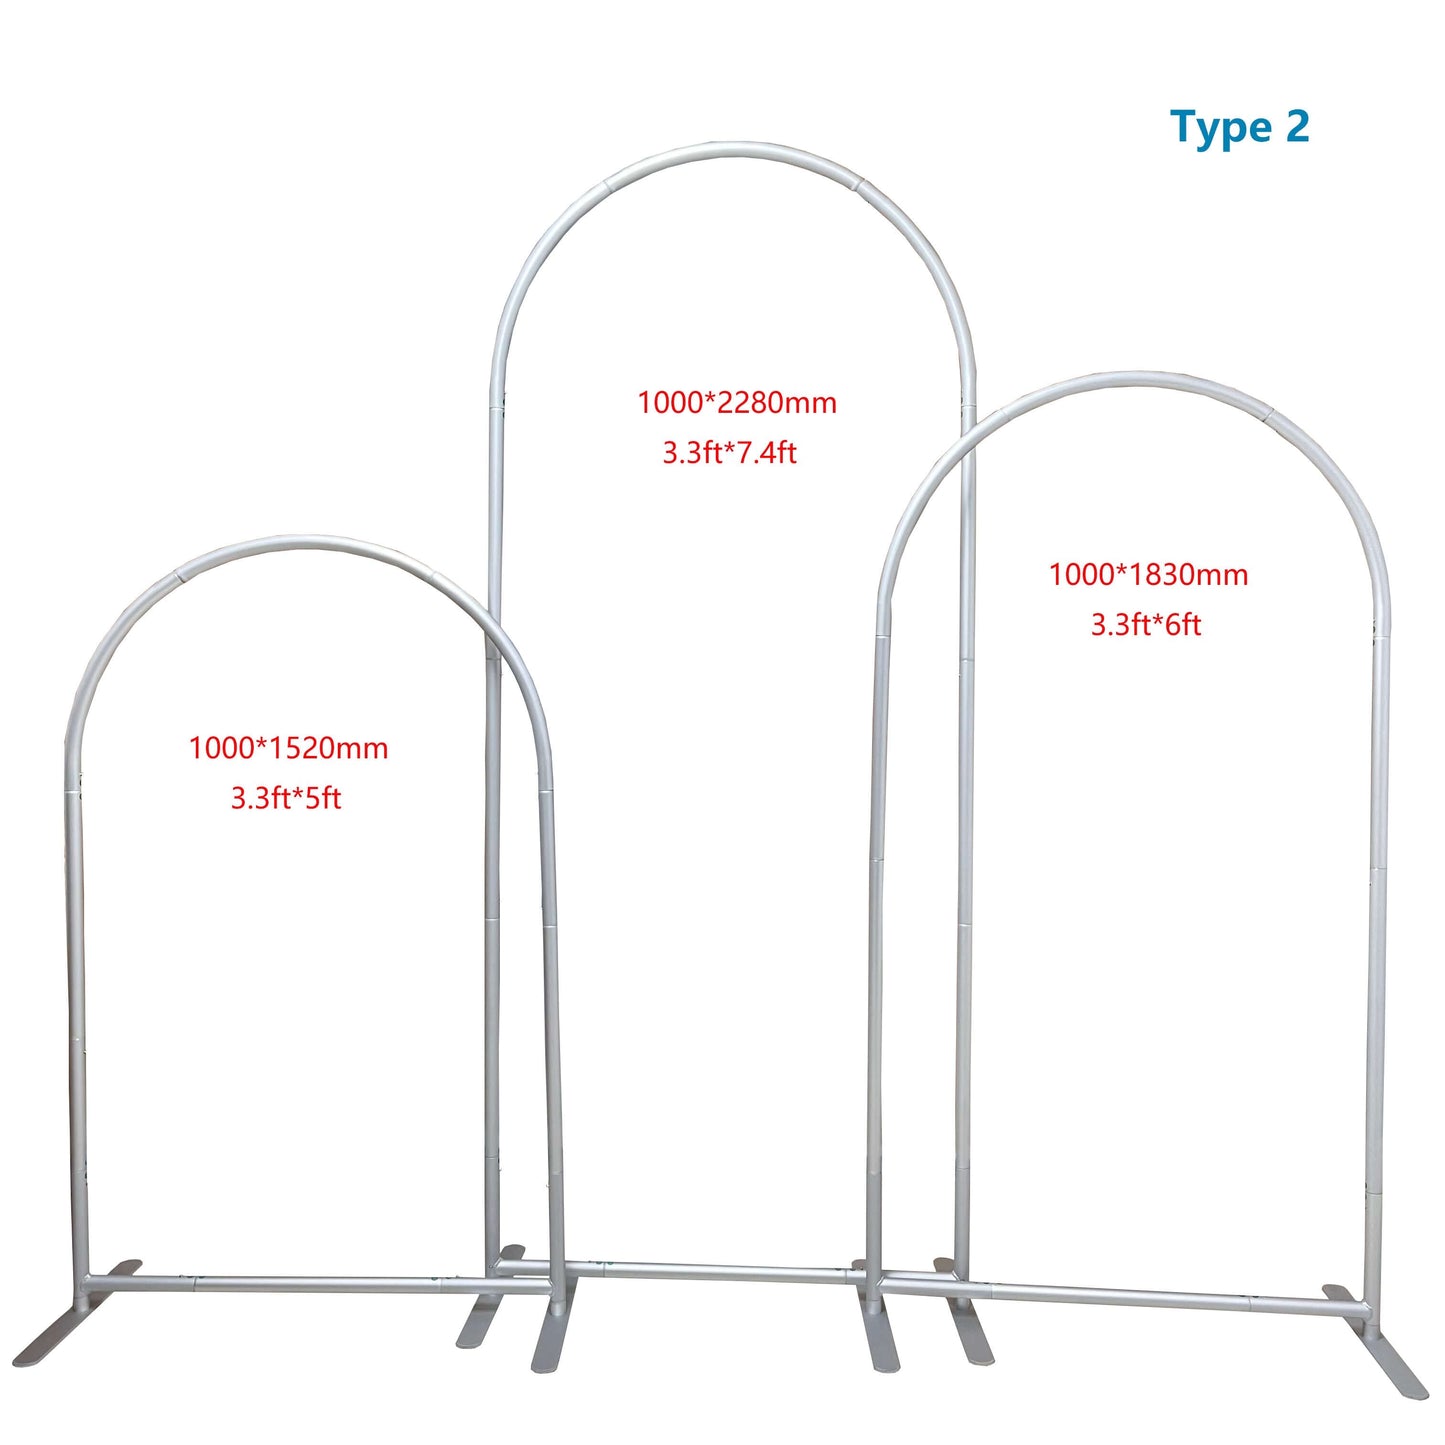 Chiara Arch Stand Frames 5X7Ft Aperto 3X4Ft 4X7Ft 3.3X5Ft+3.3X7.4Ft+3.3X6Ft Stand Fondale per Feste